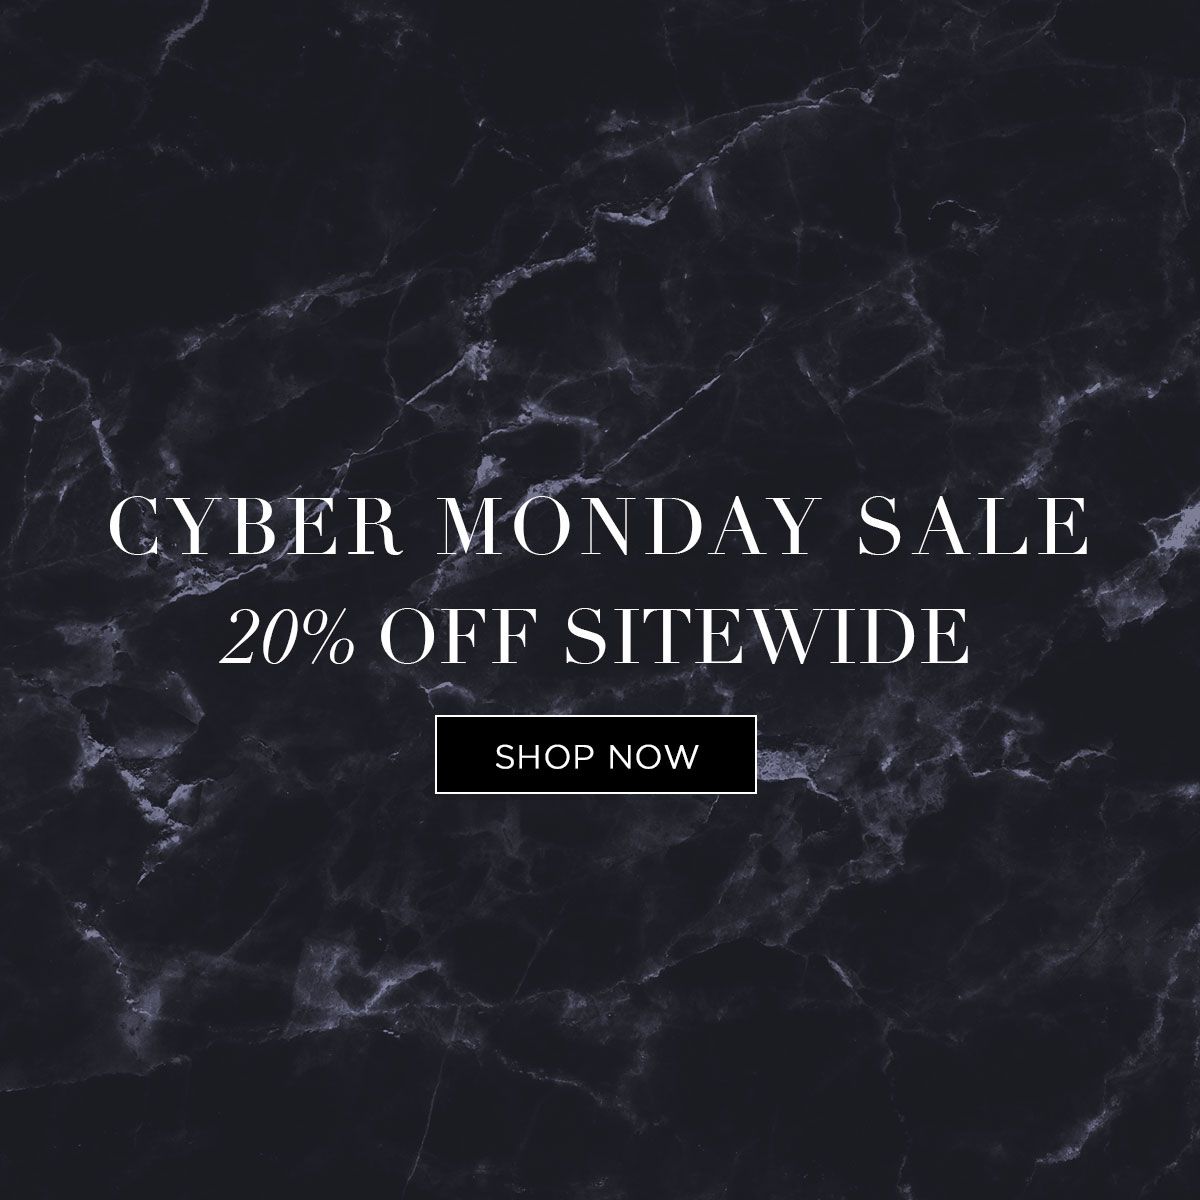 20% off the entire Evanescence store for Cyber Monday! https://t.co/q4zVT5ejY6 https://t.co/49zRoUWJ0h